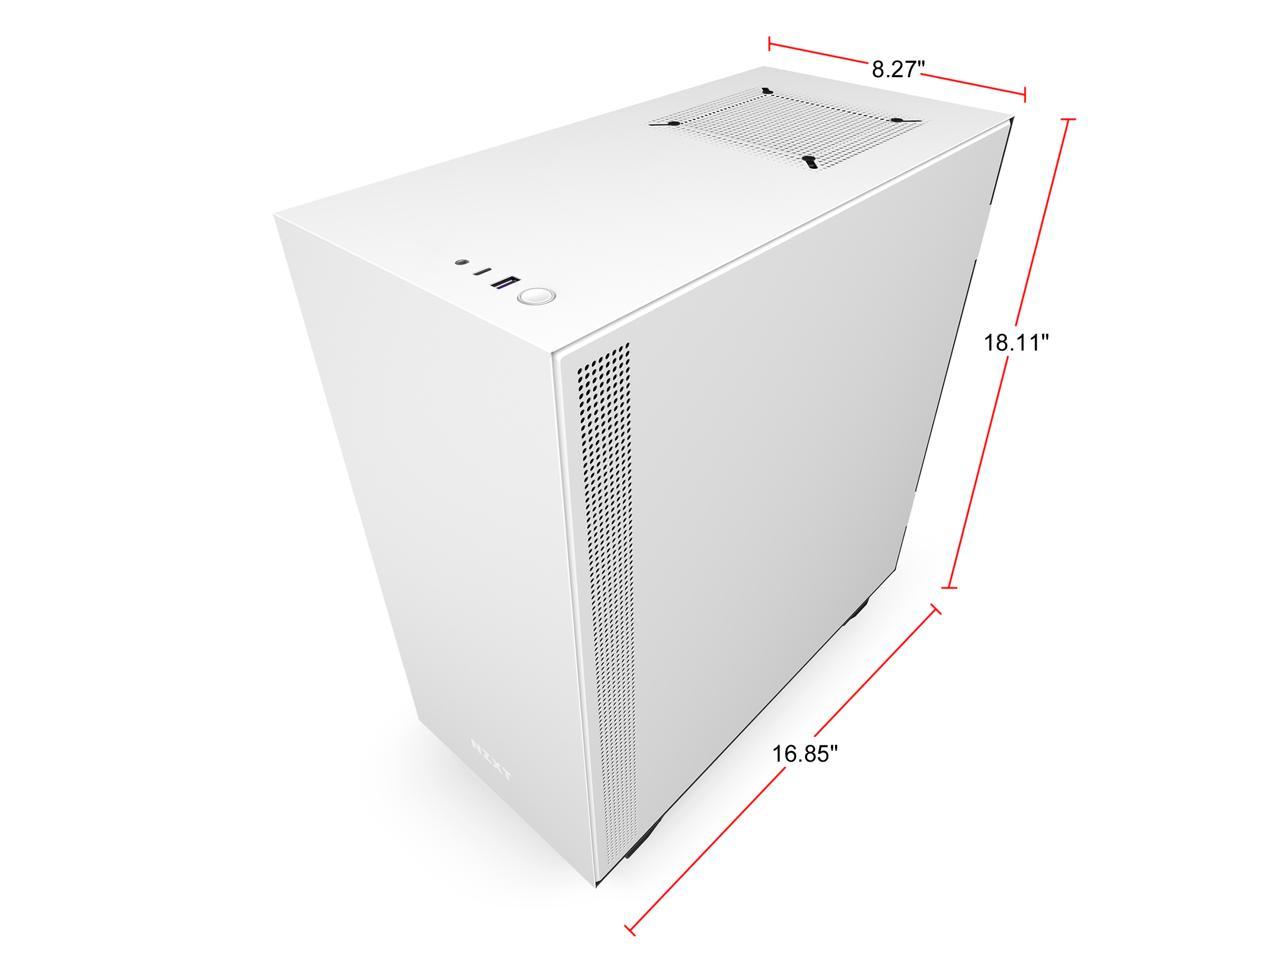 NZXT H510i - Compact ATX Mid -Tower PC Gaming Case - Front I/O USB Type-C Port - Vertical GPU Mount - Tempered Glass Side Panel - Integrated RGB Lighting - Water-Cooling Ready - White/Black